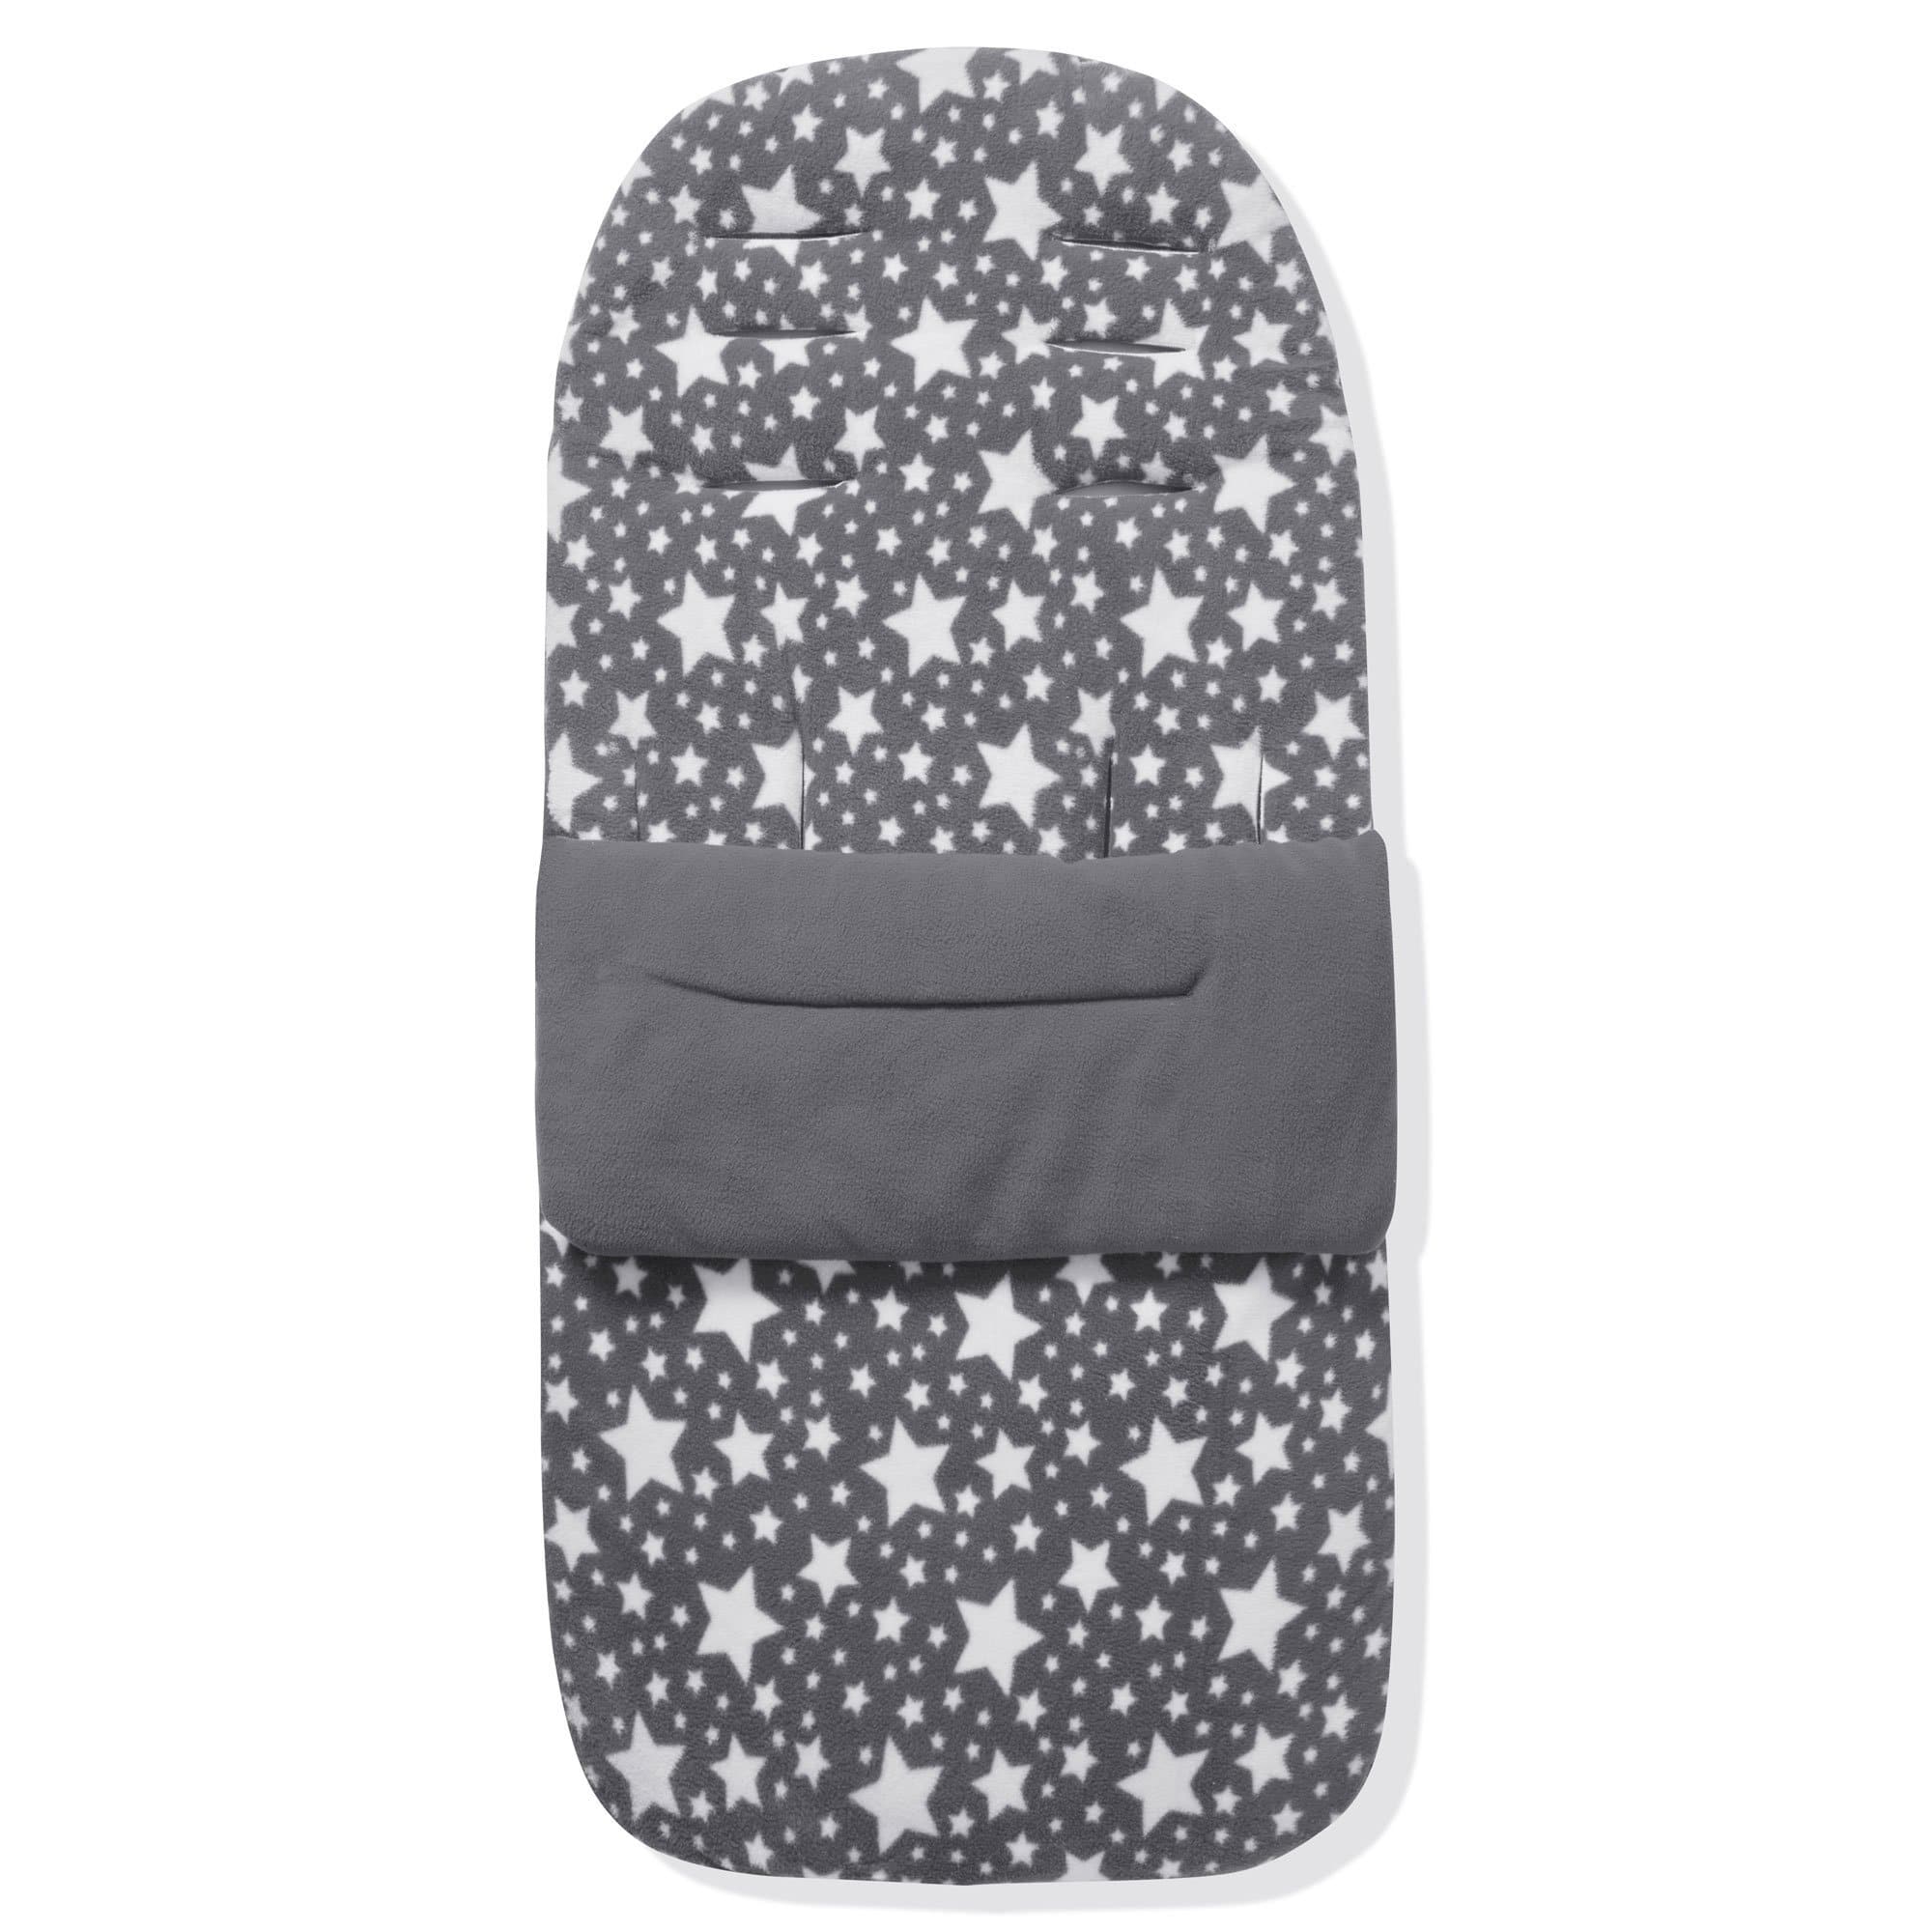 Fleece Footmuff / Cosy Toes Compatible with Mothercare - Grey Star / Fits All Models | For Your Little One